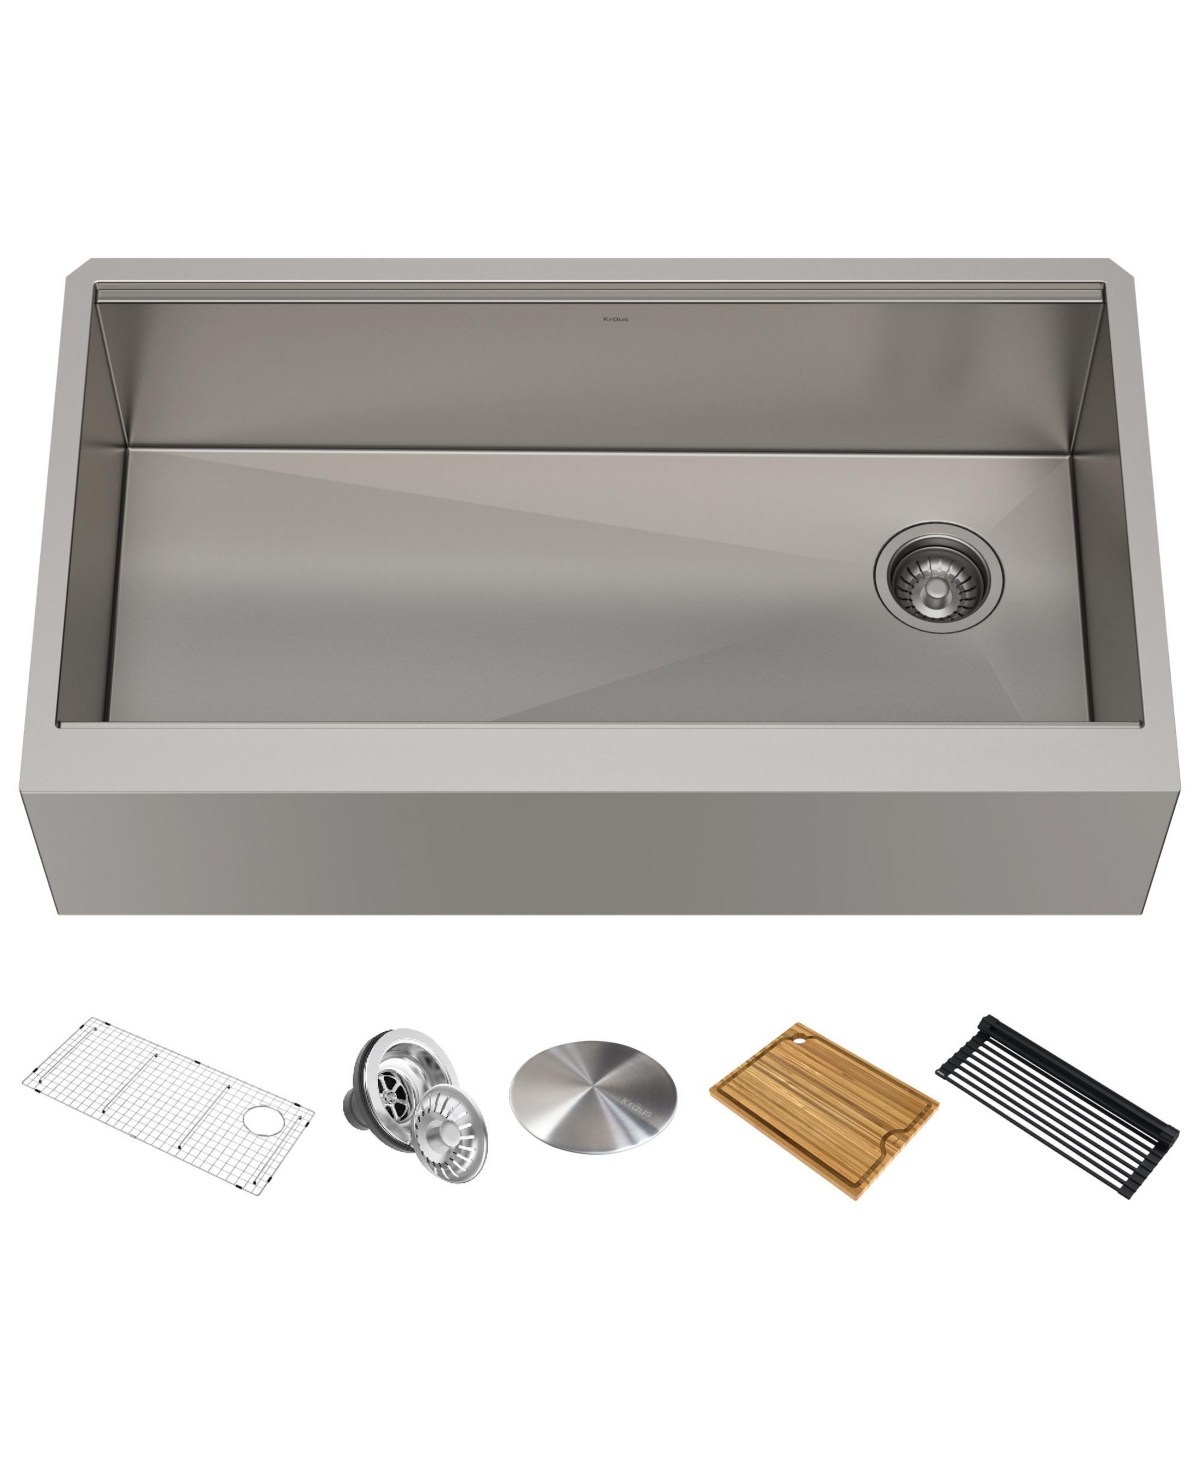 Kore 36 in. Workstation Farmhouse Flat Apron Front 16 Gauge Single Bowl Stainless Steel Kitchen Sink with Accessories - Stainless steel